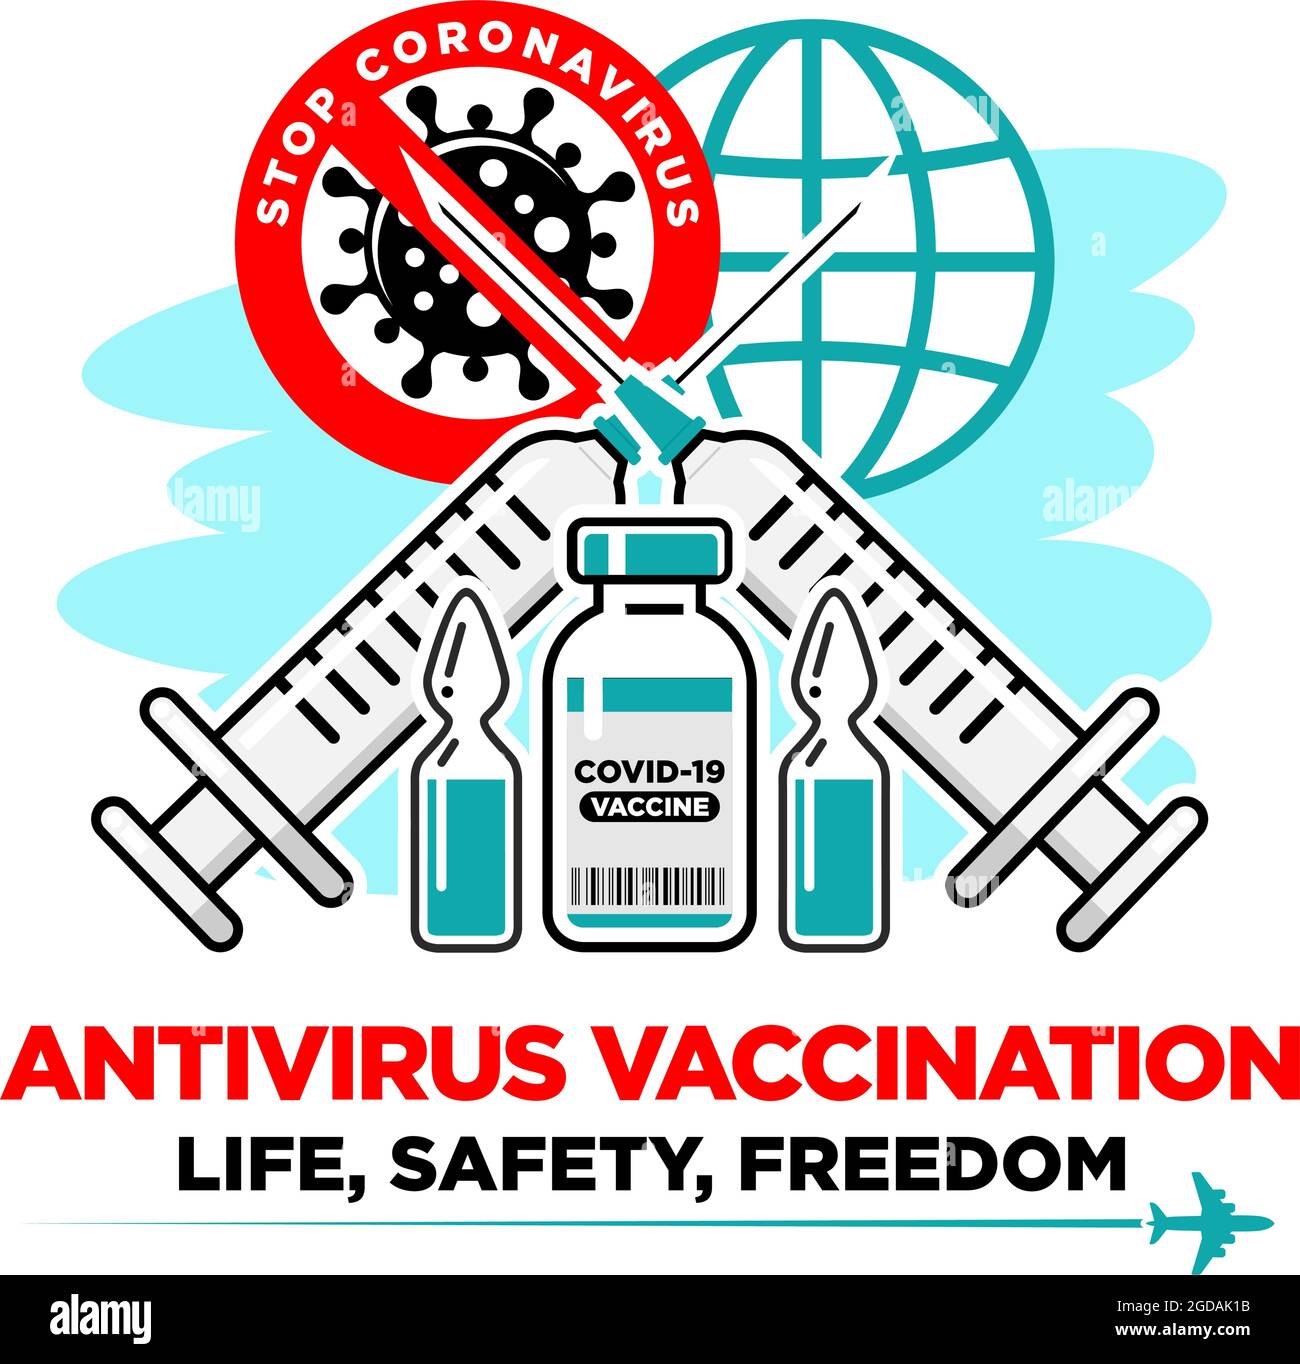 COVID-19 global vaccination concept. Medical syringe with needle, Vial and bottle with the drug against coronavirus. Life, safety, freedom travel. Vec Stock Vector